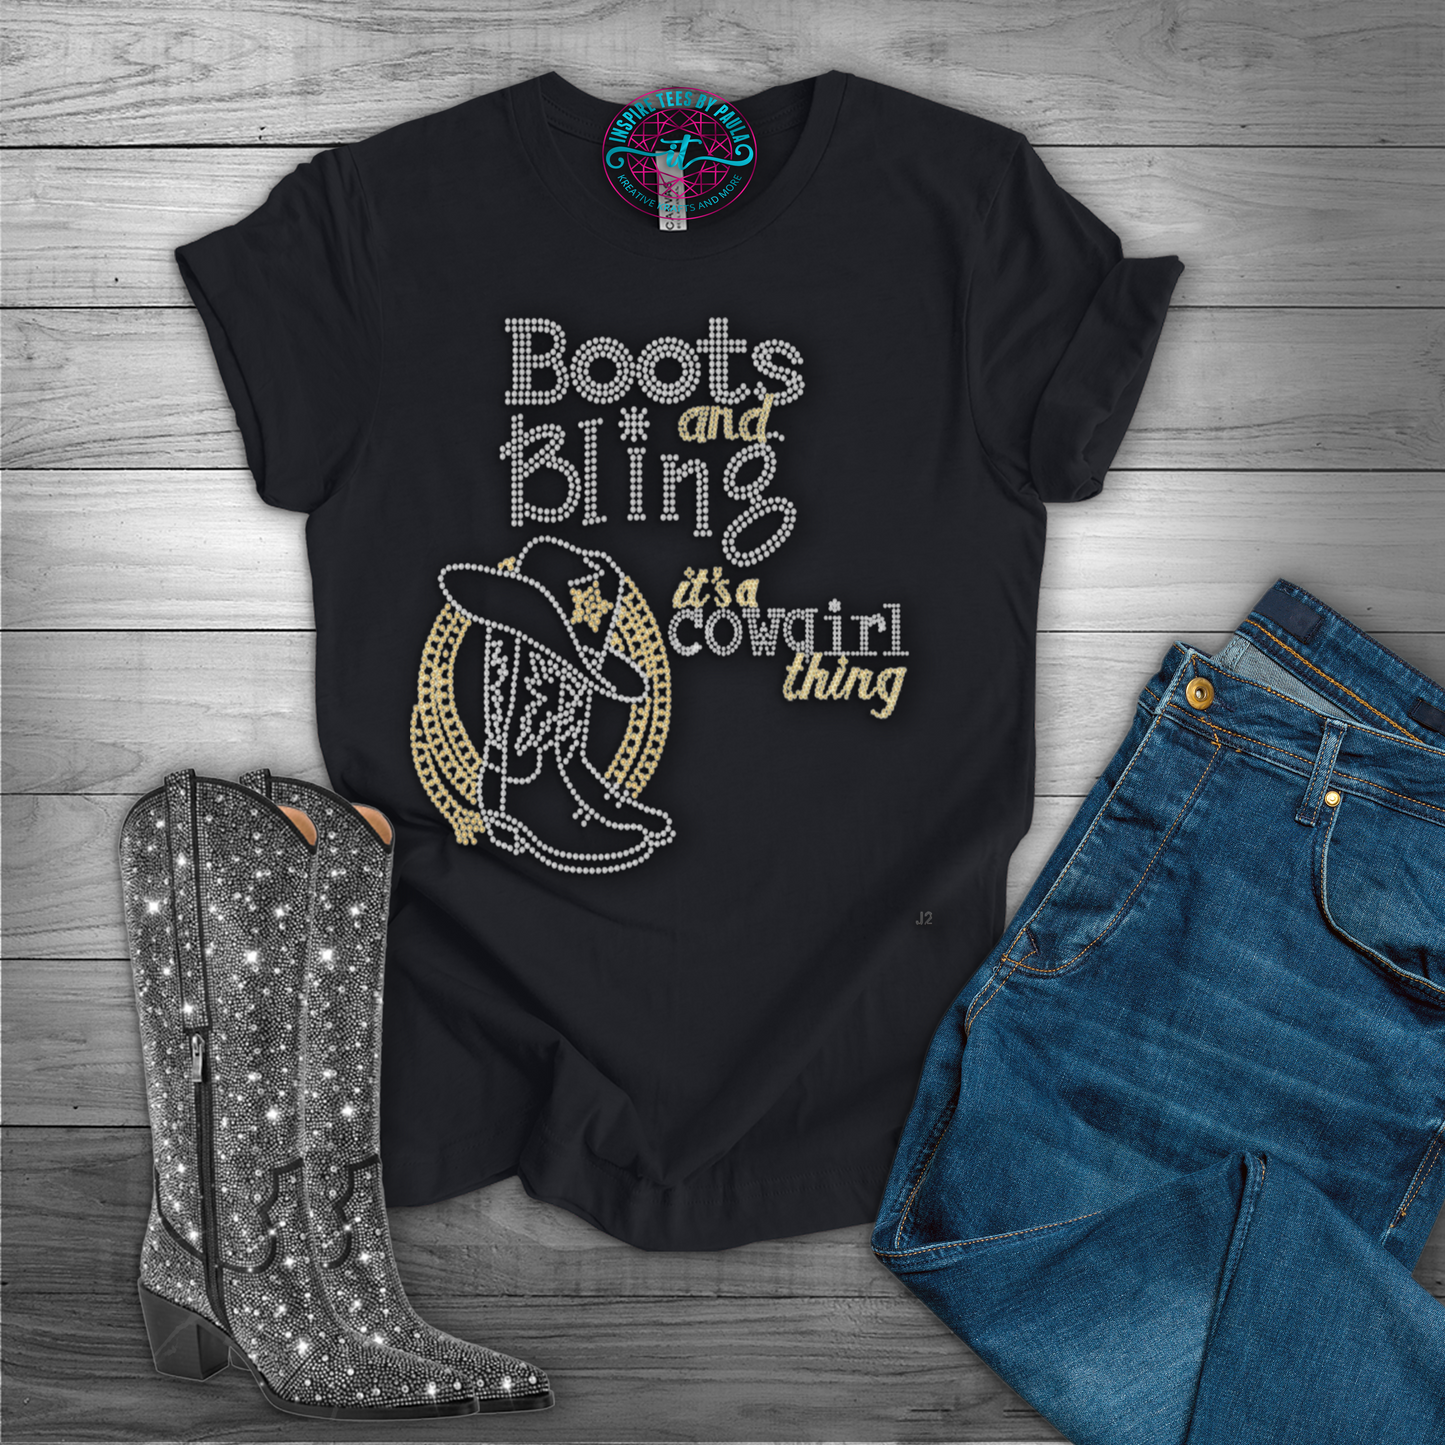 Boots and Bling it's a Cowgirl Thing (Tee & Sweatshirt available)